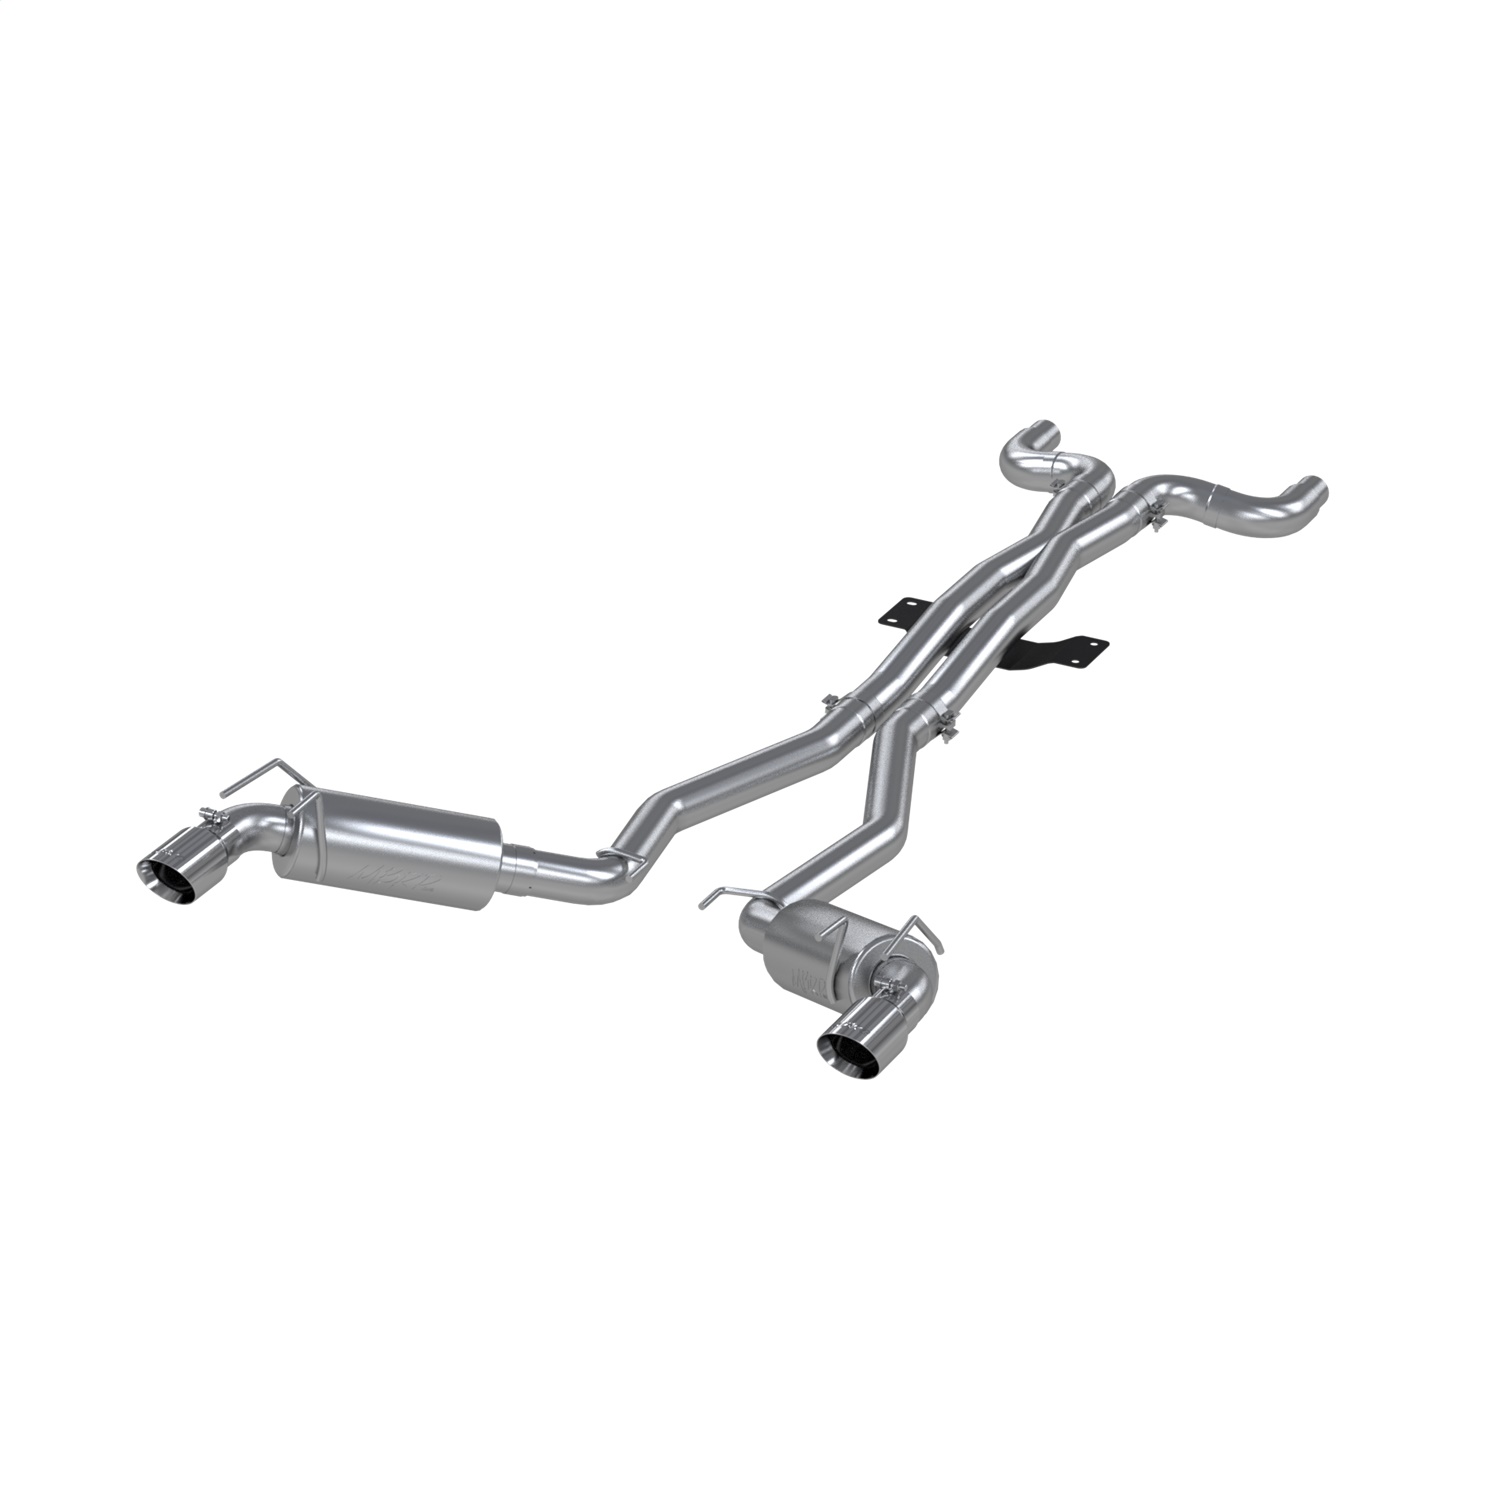 MBRP Exhaust S7018409 Armor Plus Cat Back Exhaust System Fits 10-15 Camaro